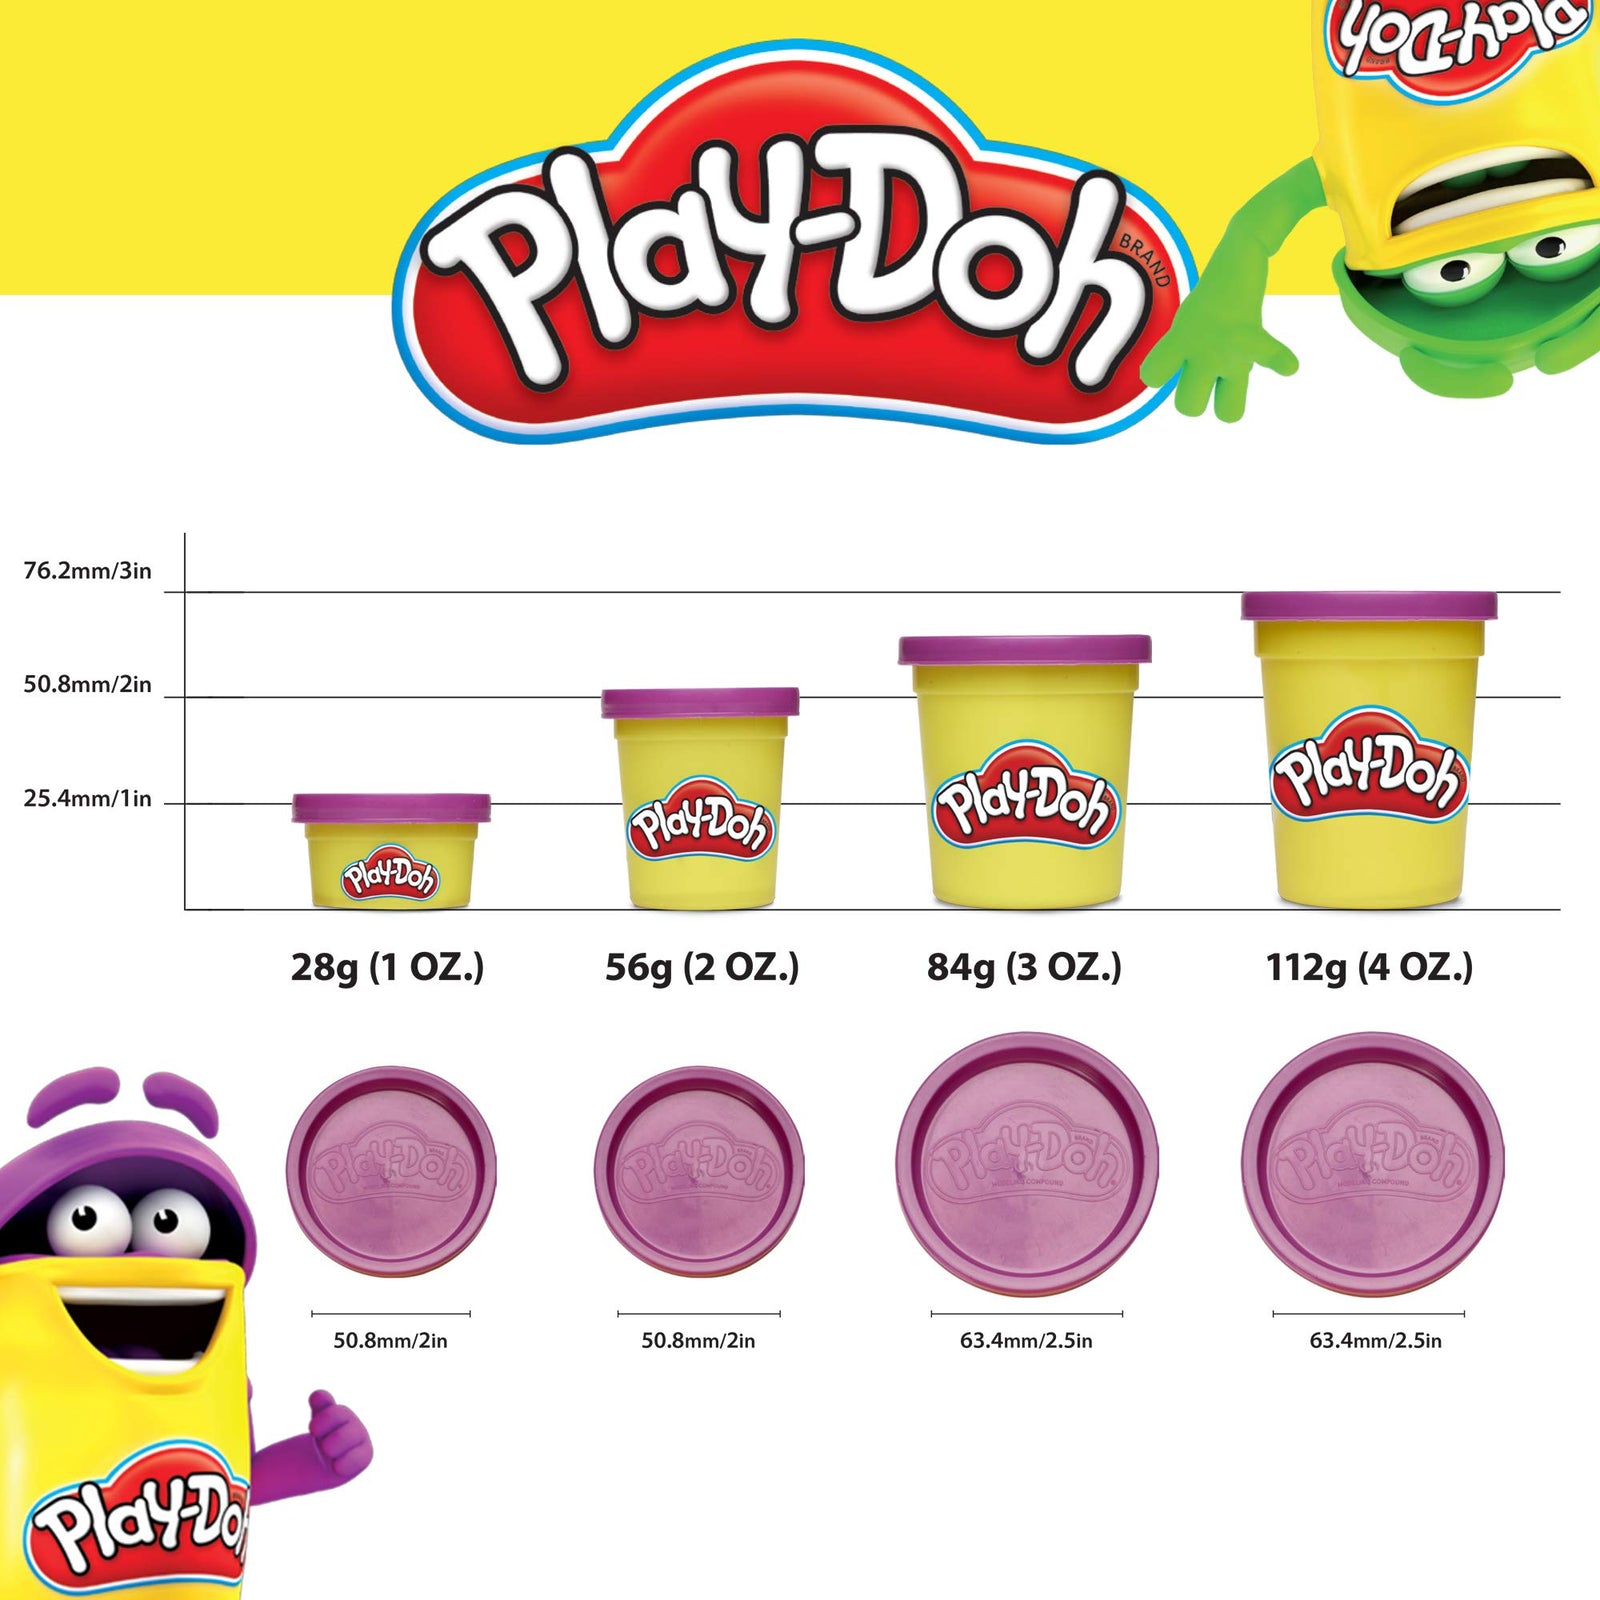 Play-Doh Modeling Compound 10-Pack Case of Colors, Non-Toxic, Assorted, 2 oz. Cans, Ages 2 and up, Multicolor (Amazon Exclusive)